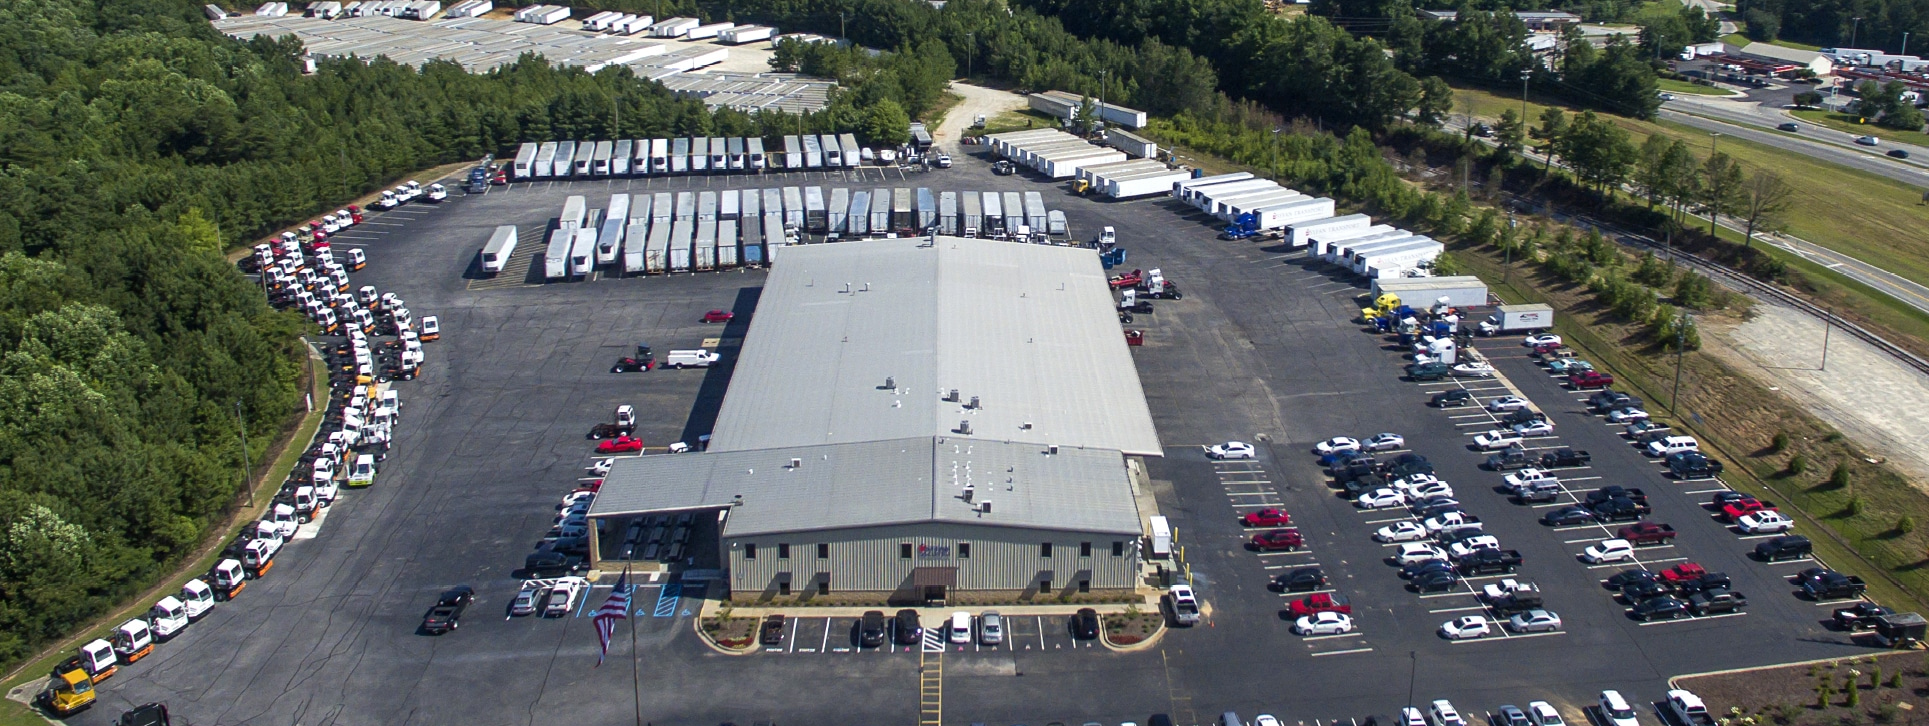 Aerial view of the Syfan Logistics Headquarters building and parking lot full of terminal tractors, tractor trailers, and cars.